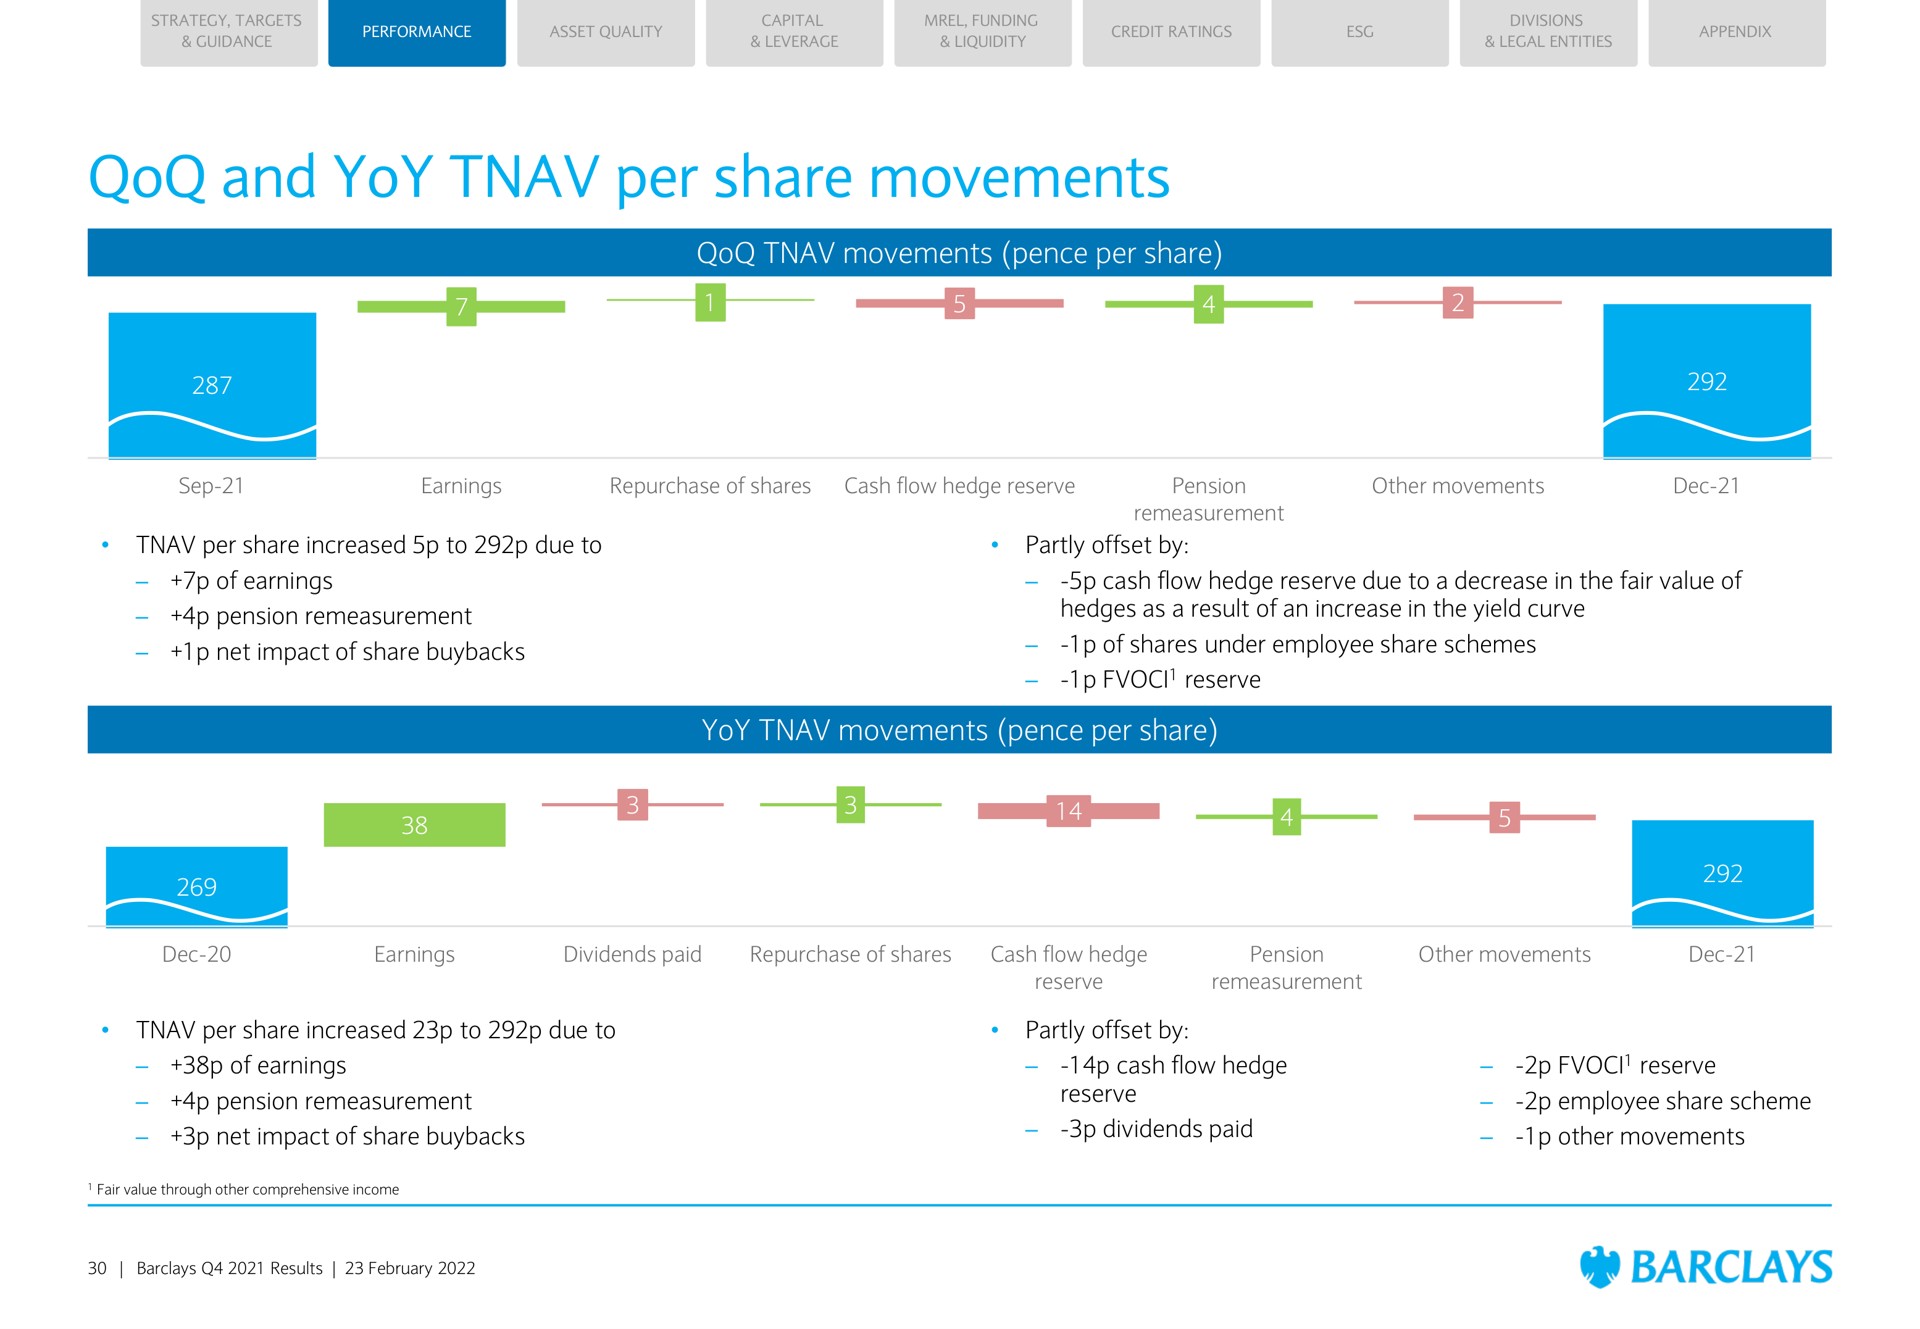 and yoy per share movements movements pence per share yoy movements pence per share i | Barclays